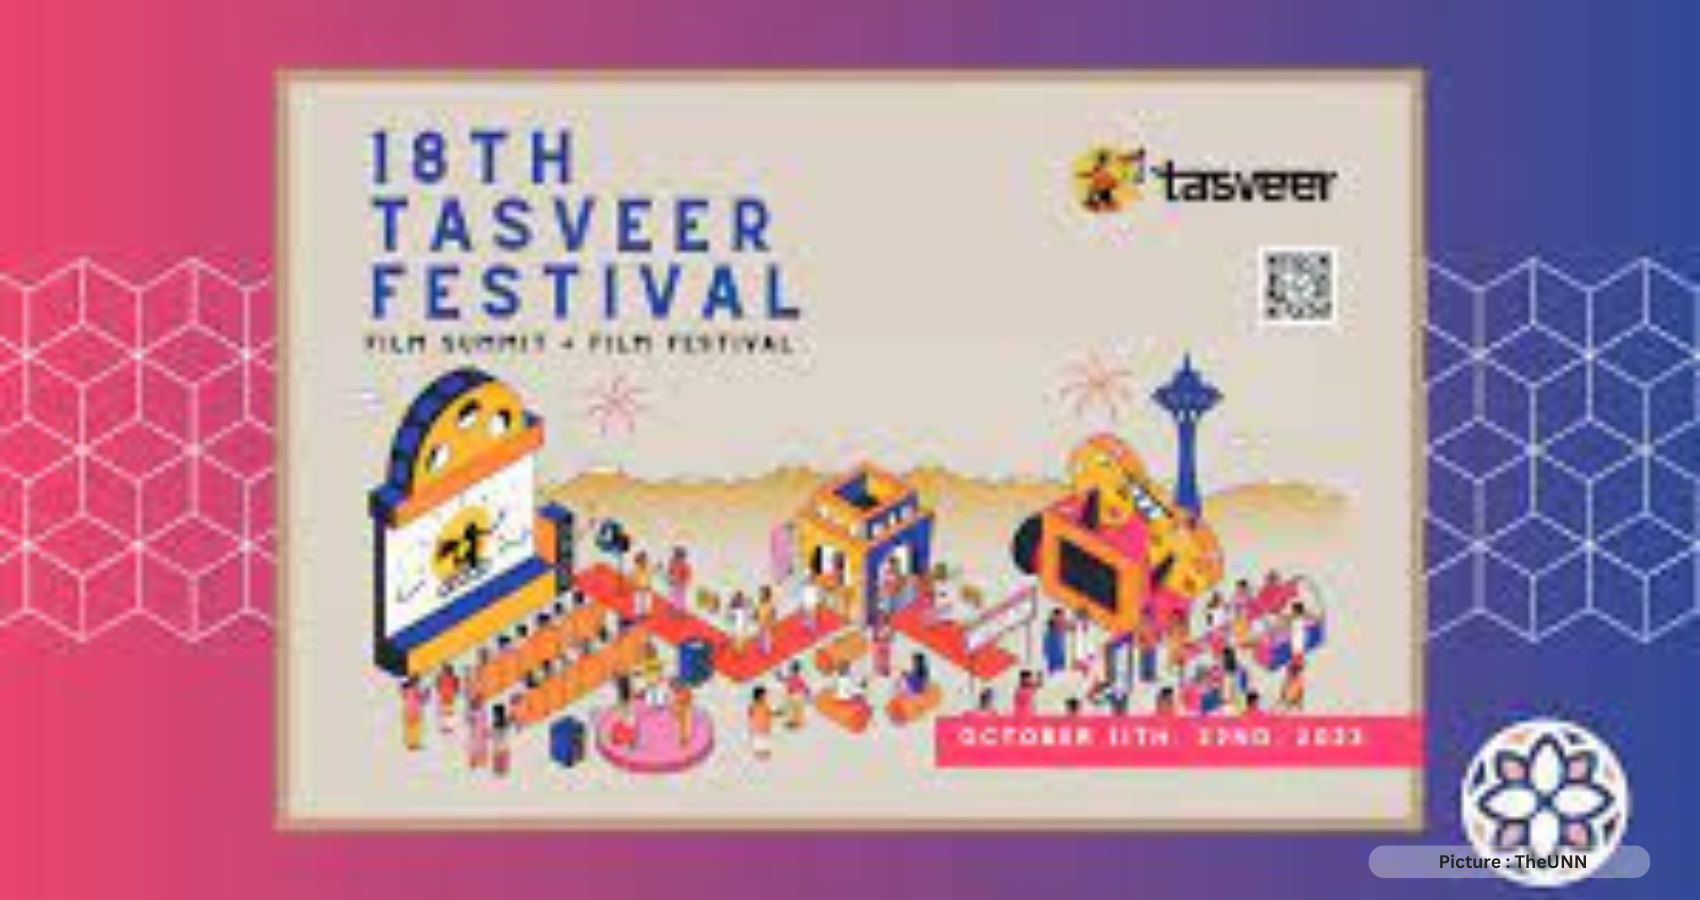 Tasveer Film Festival Presents 18th Edition Lineup, Bridging Cultures And Breaking Barriers Through Film